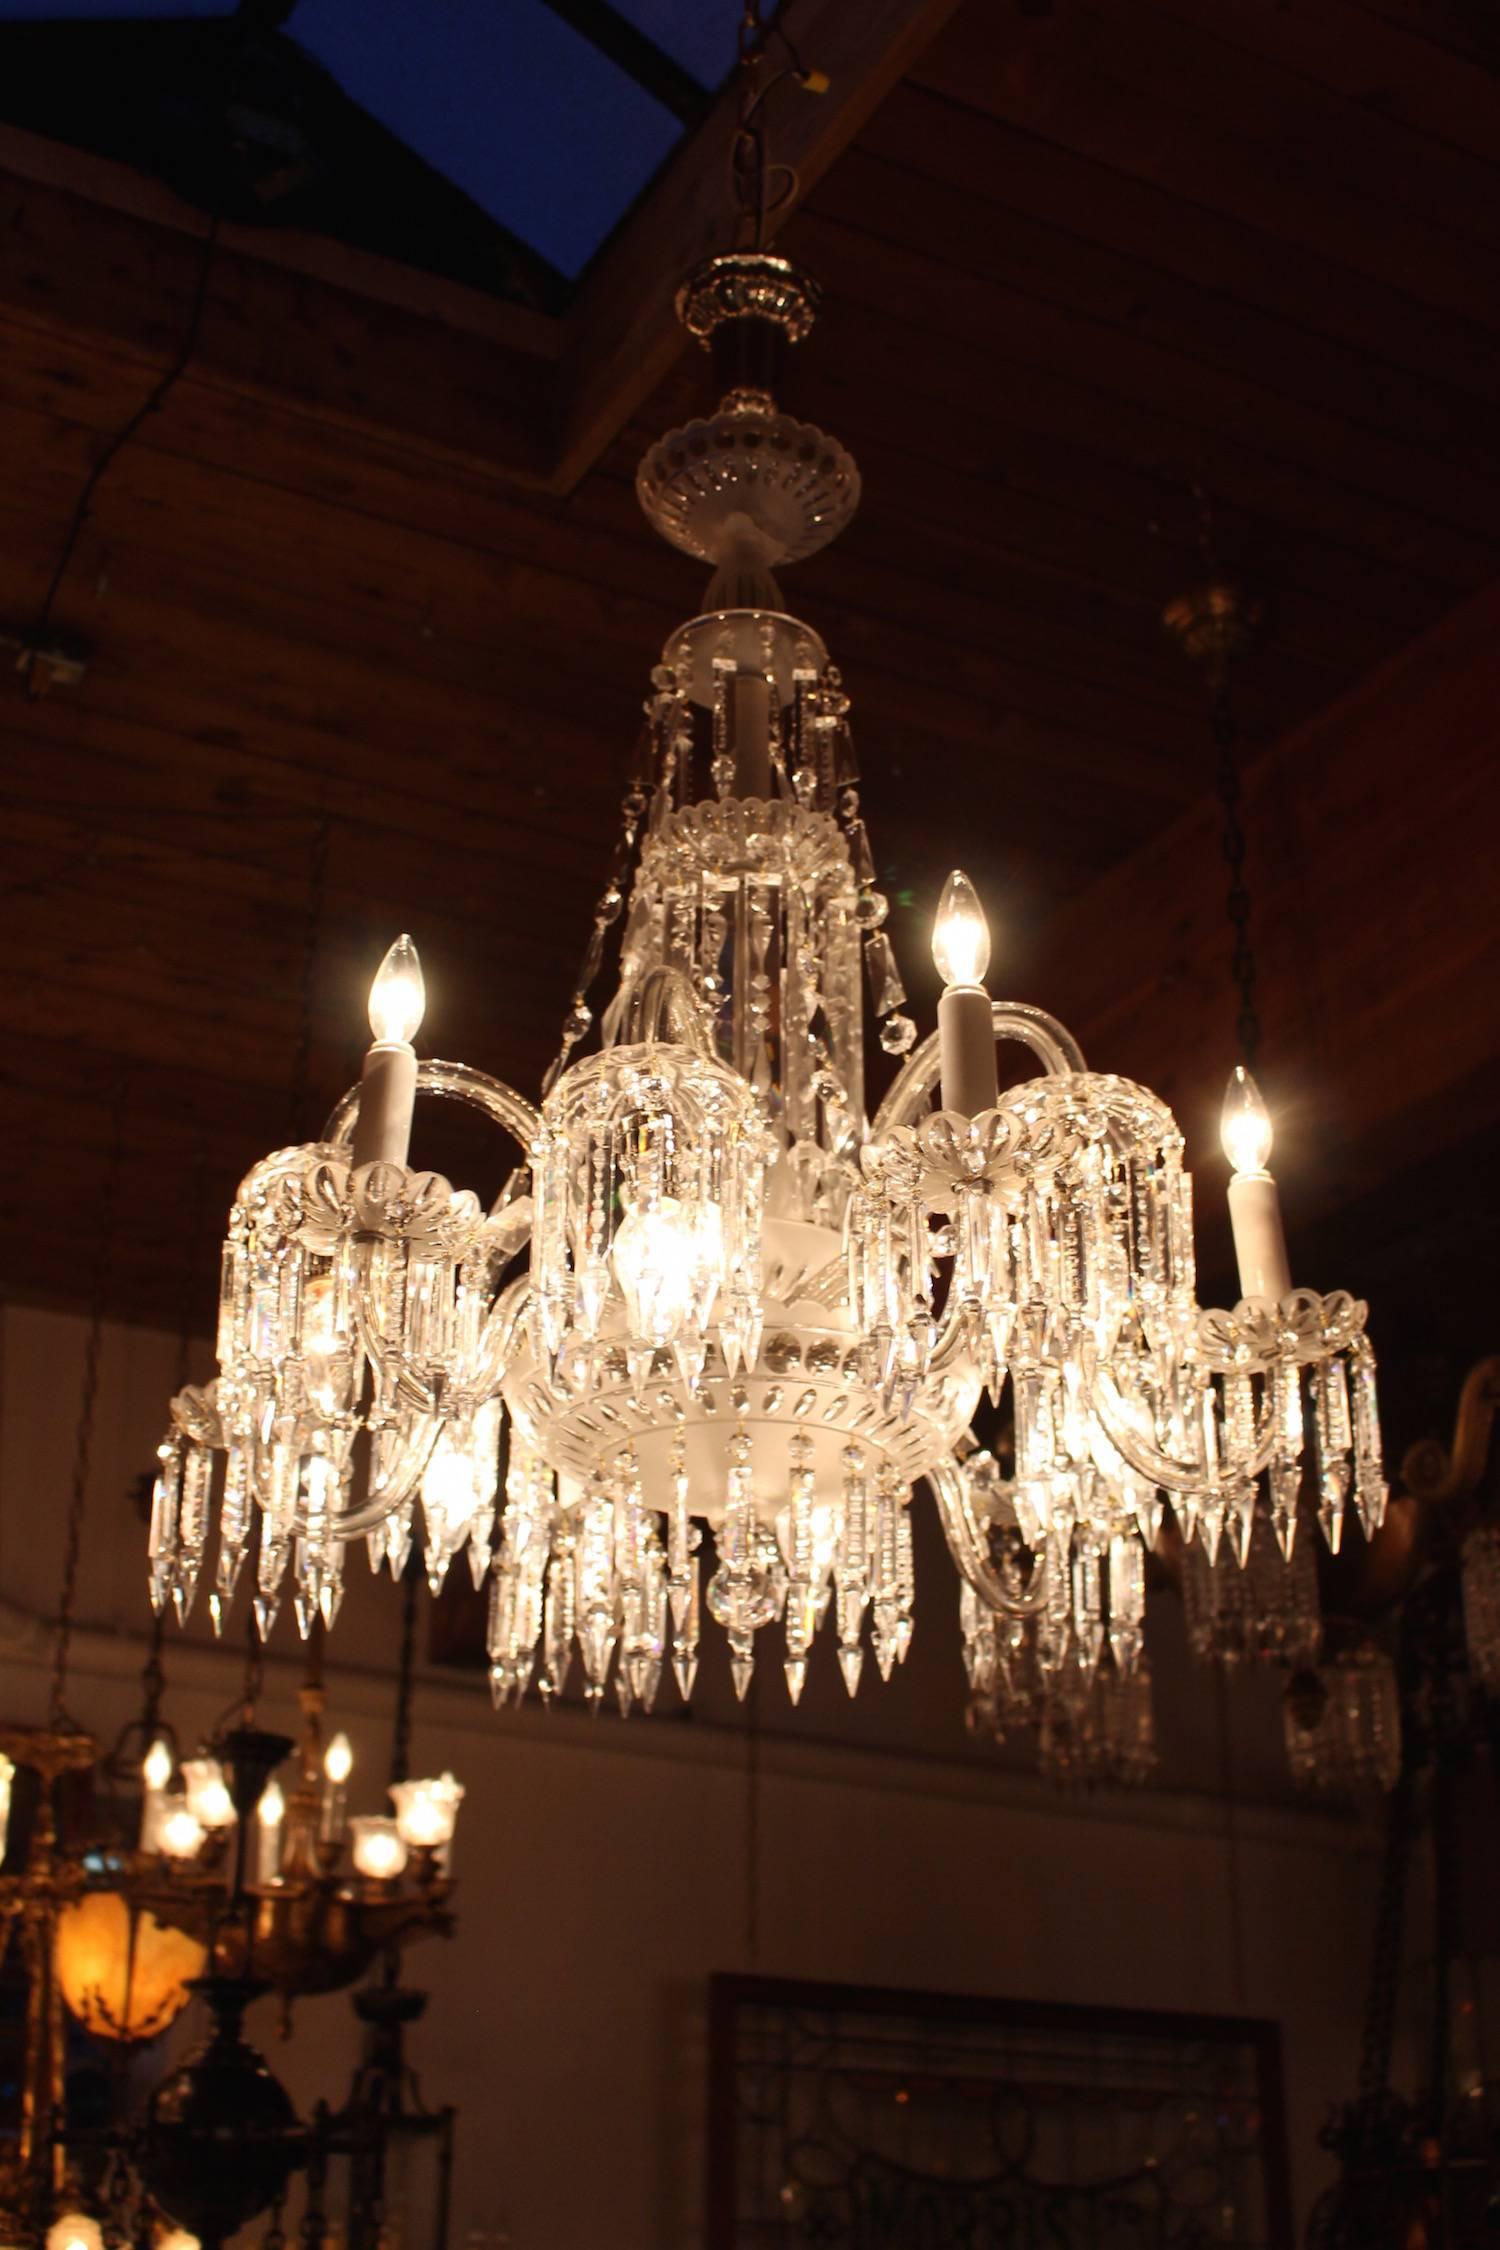 This is an absolute top quality combination gas-electric crystal chandelier by Mitchell Vance Co., a premier chandelier maker of New York, circa 1900. Attributed to Mitchell Vance because of the very unusual cutting pattern on bottom of etched glass